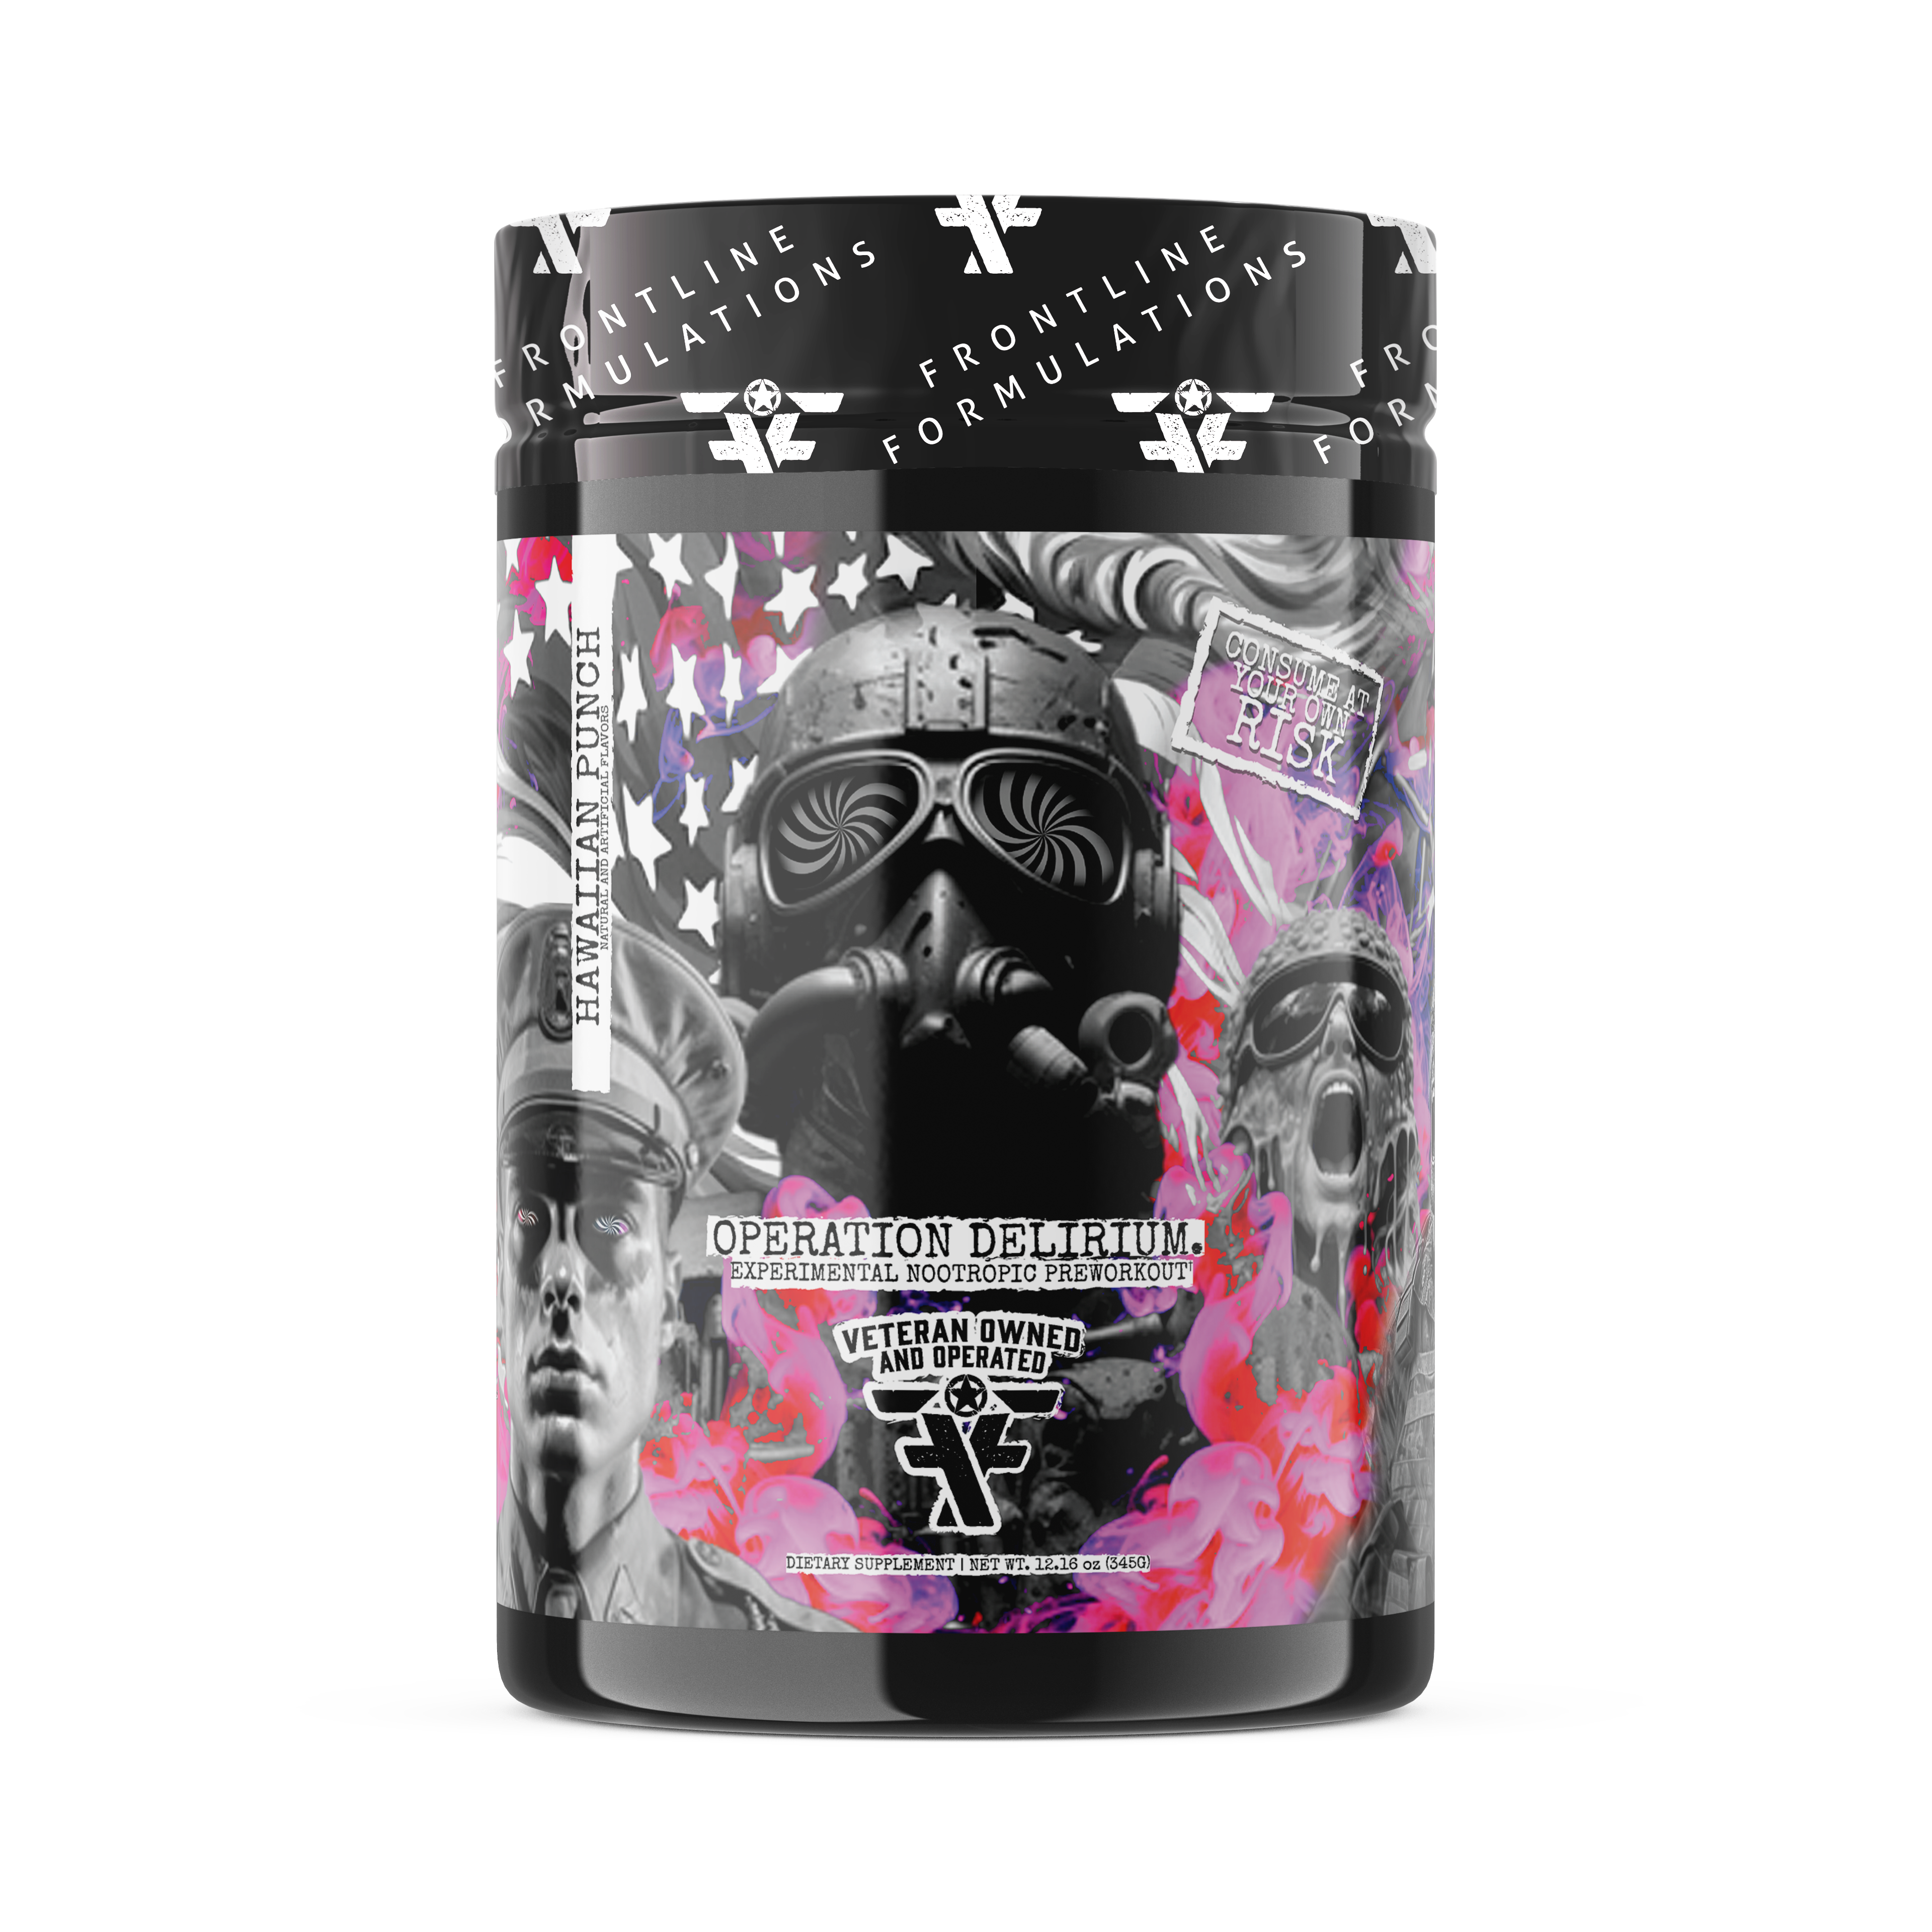 Operation Delirium: Experimental Nootropic Preworkout Introducing Operation Delirium, the cutting-edge preworkout designed for warriors seeking an unparalleled boost in performance and focus. This military-grade experimental formula combines the power of